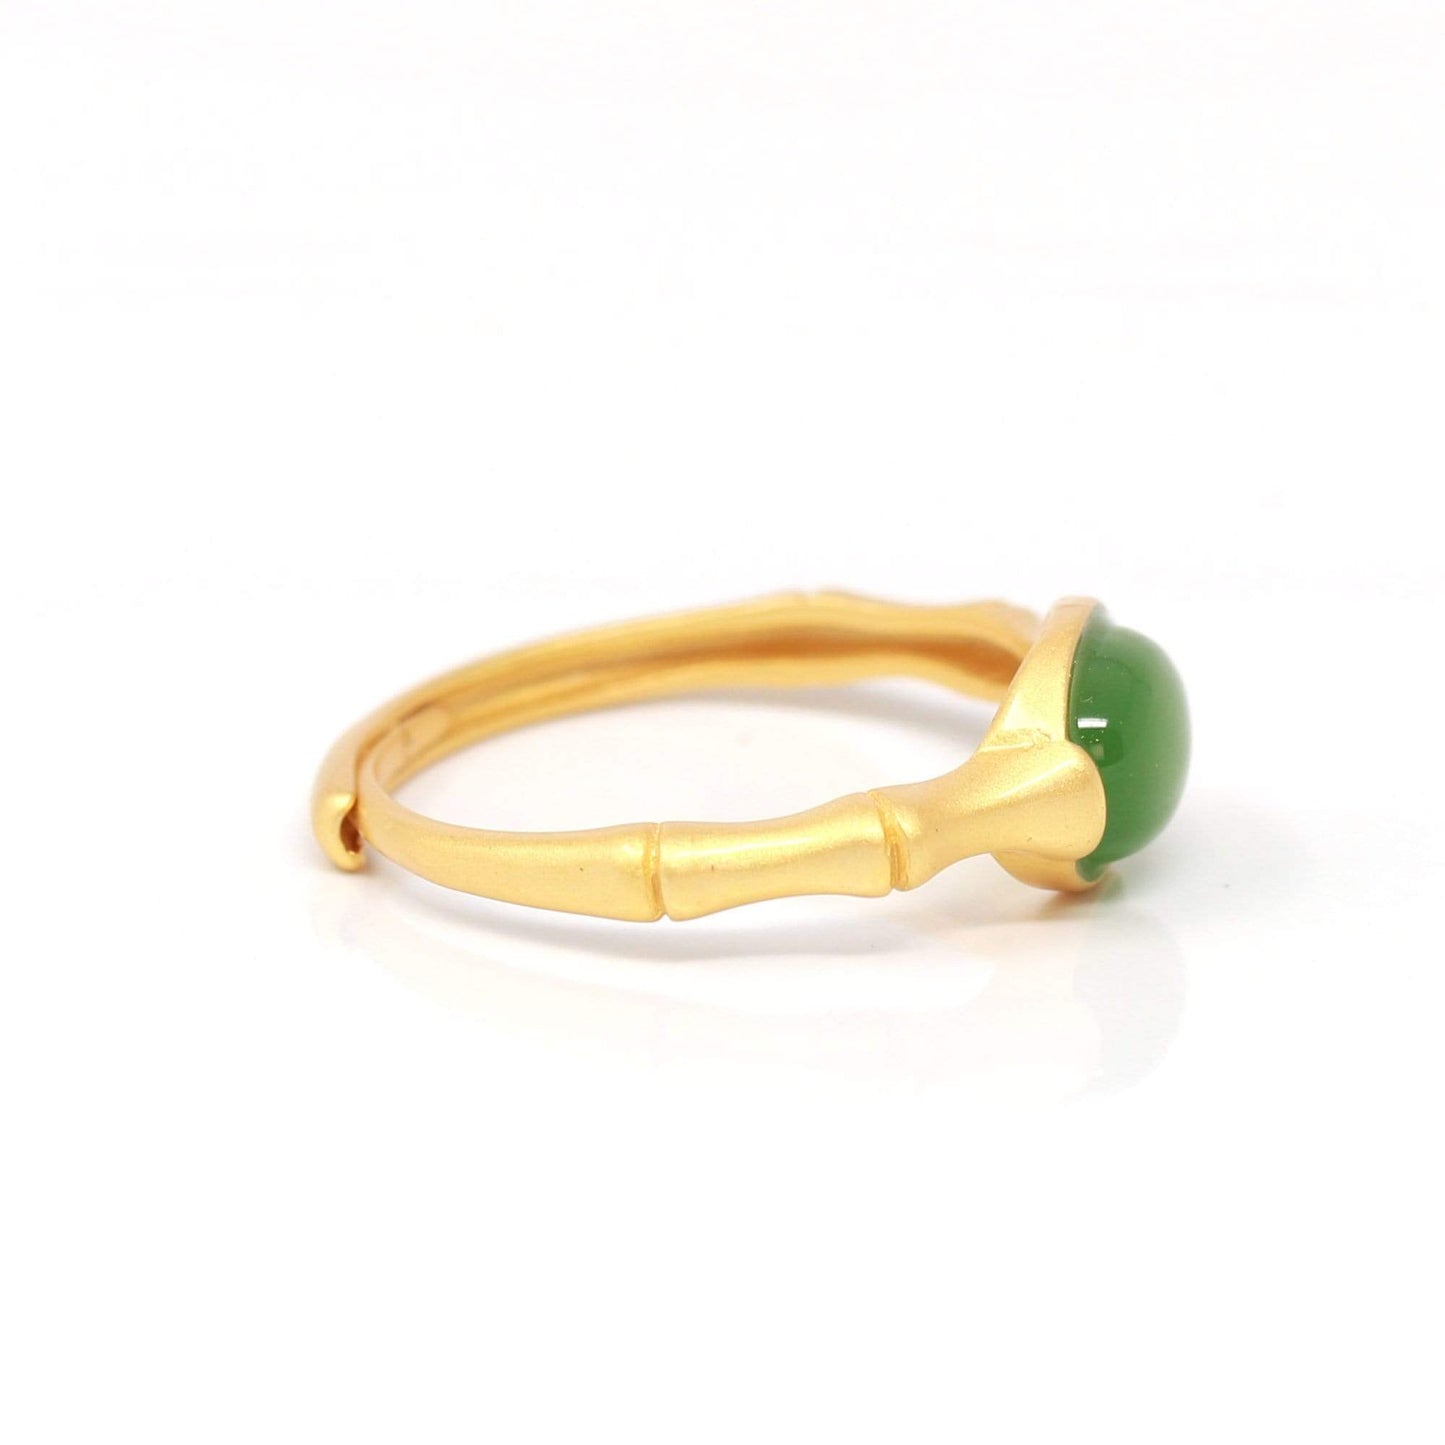 RealJade® "Classic Oval" Sterling Silver Real Green Nephrite Jade Classic Ring For Her